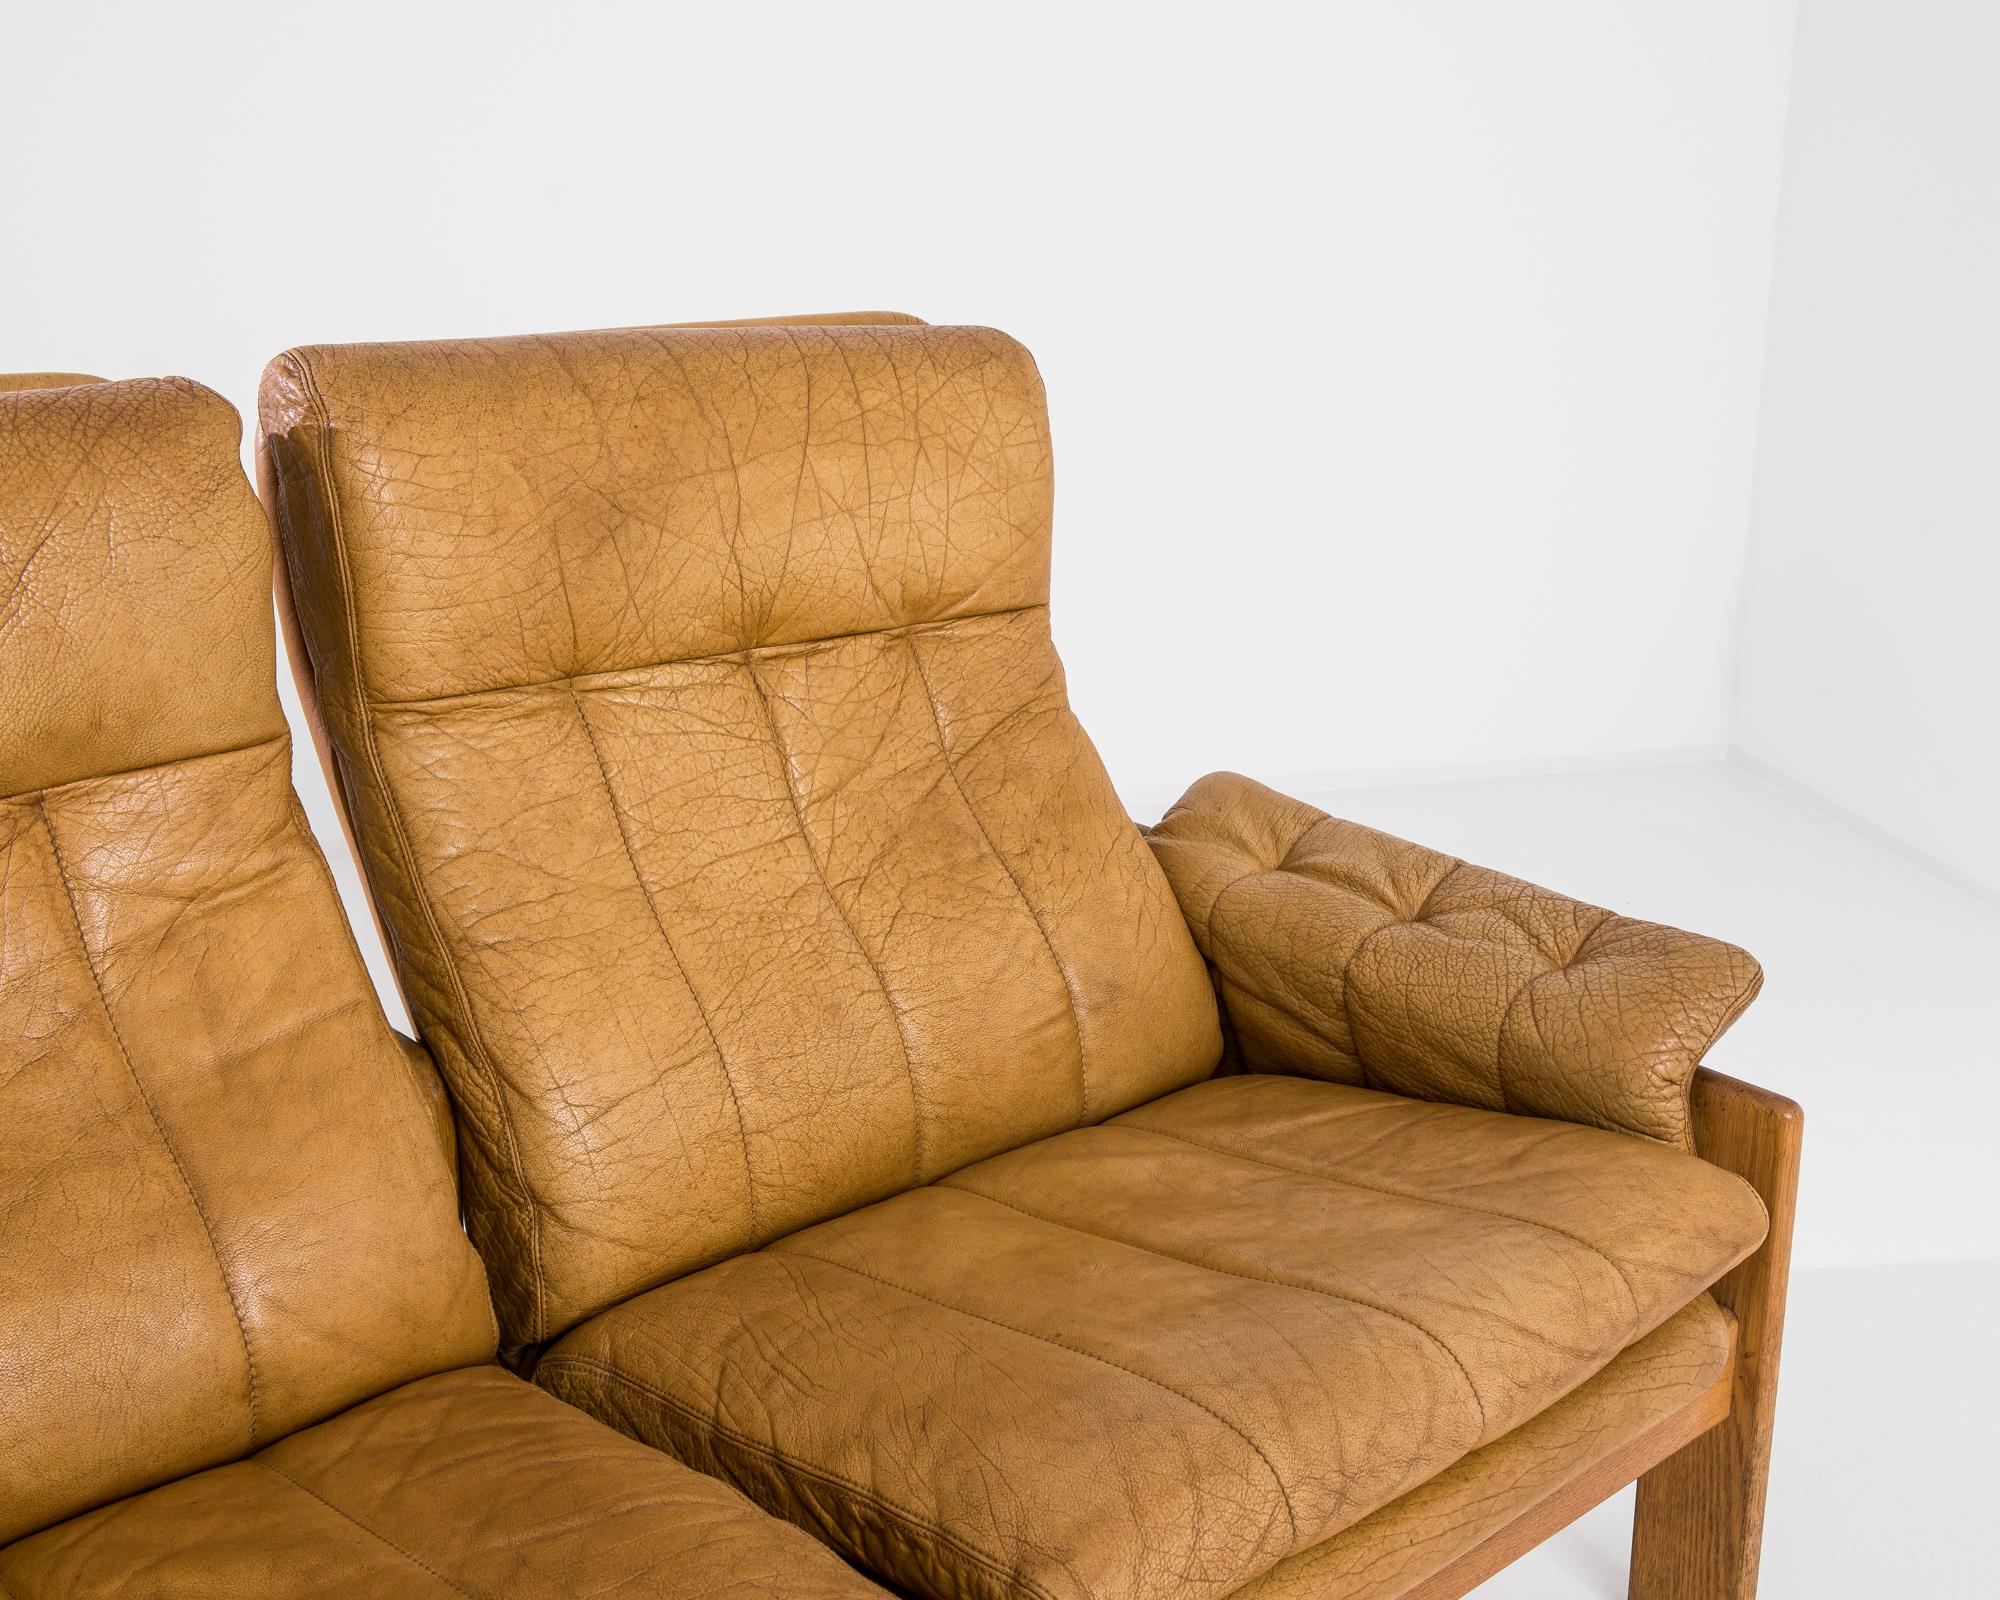 A leather sofa by Skippers Mobler, produced in Denmark circa 1960. A stately, Mid-Century, three-seat sofa in soft sand coloured leather sitting on a sparse wooden frame. Sectioned like a tandem lounger, this classic from the Danish furniture house